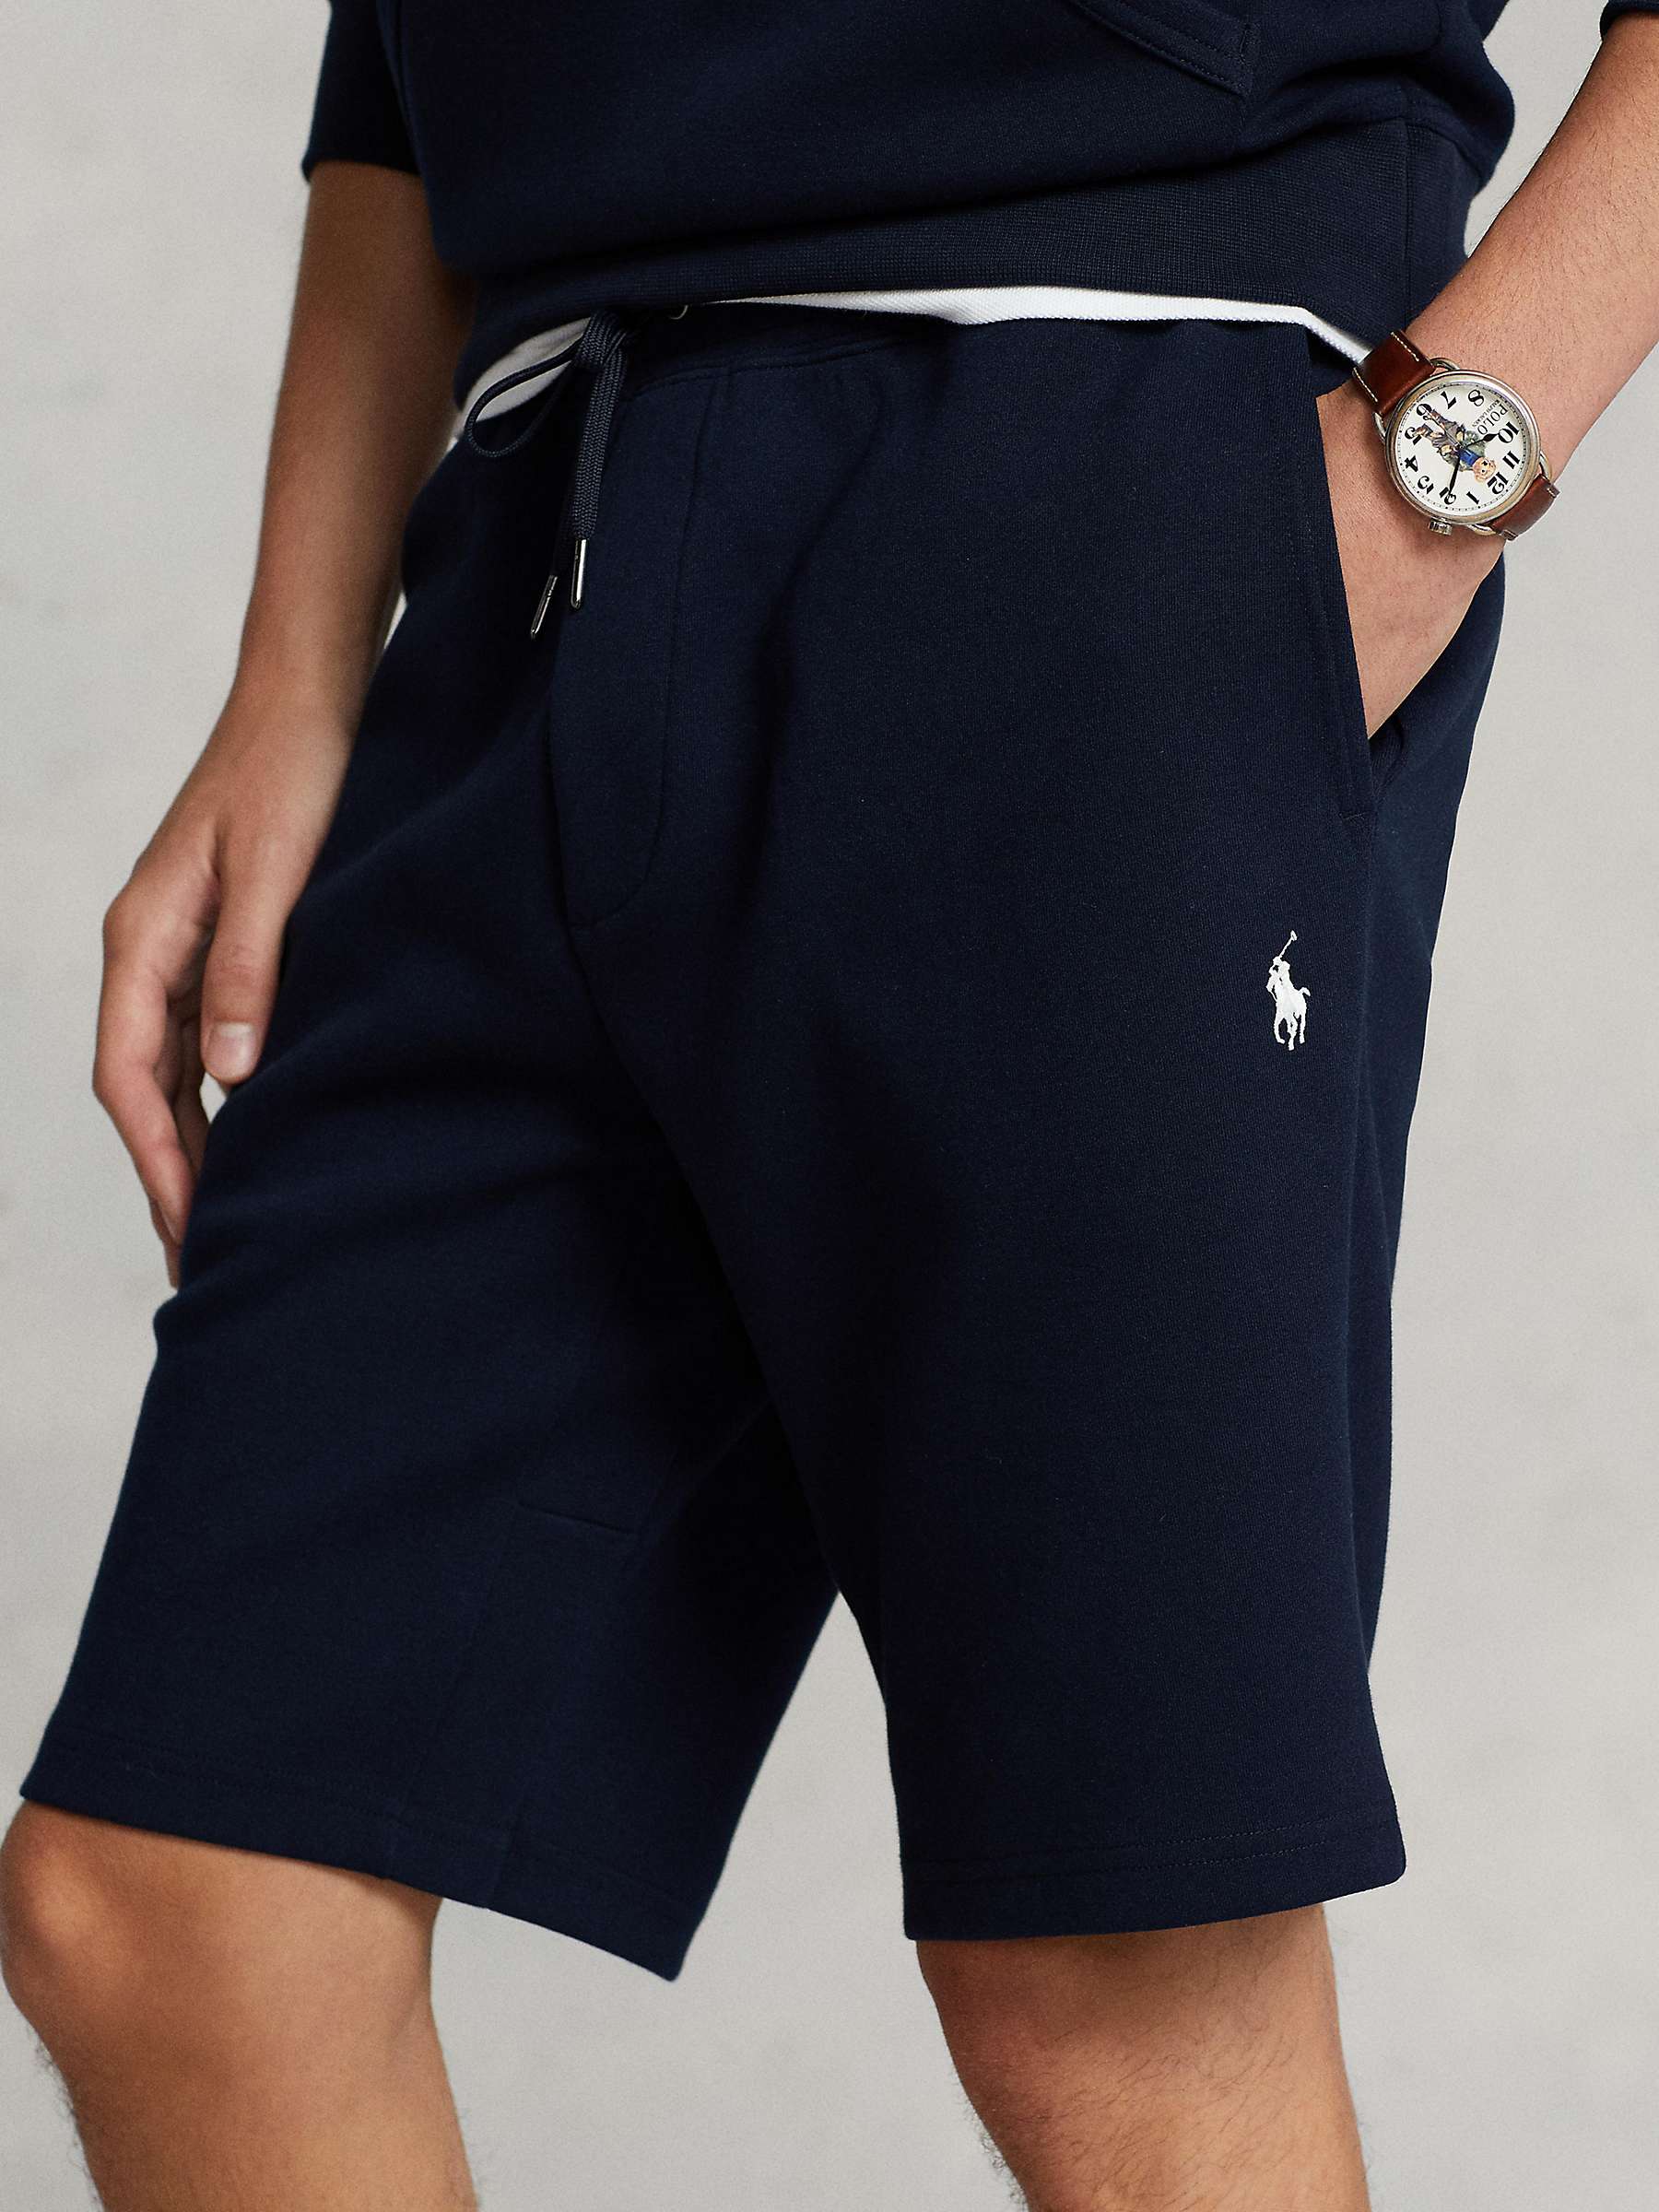 Buy Polo Ralph Lauren Double Knit Shorts, Aviator Navy Online at johnlewis.com